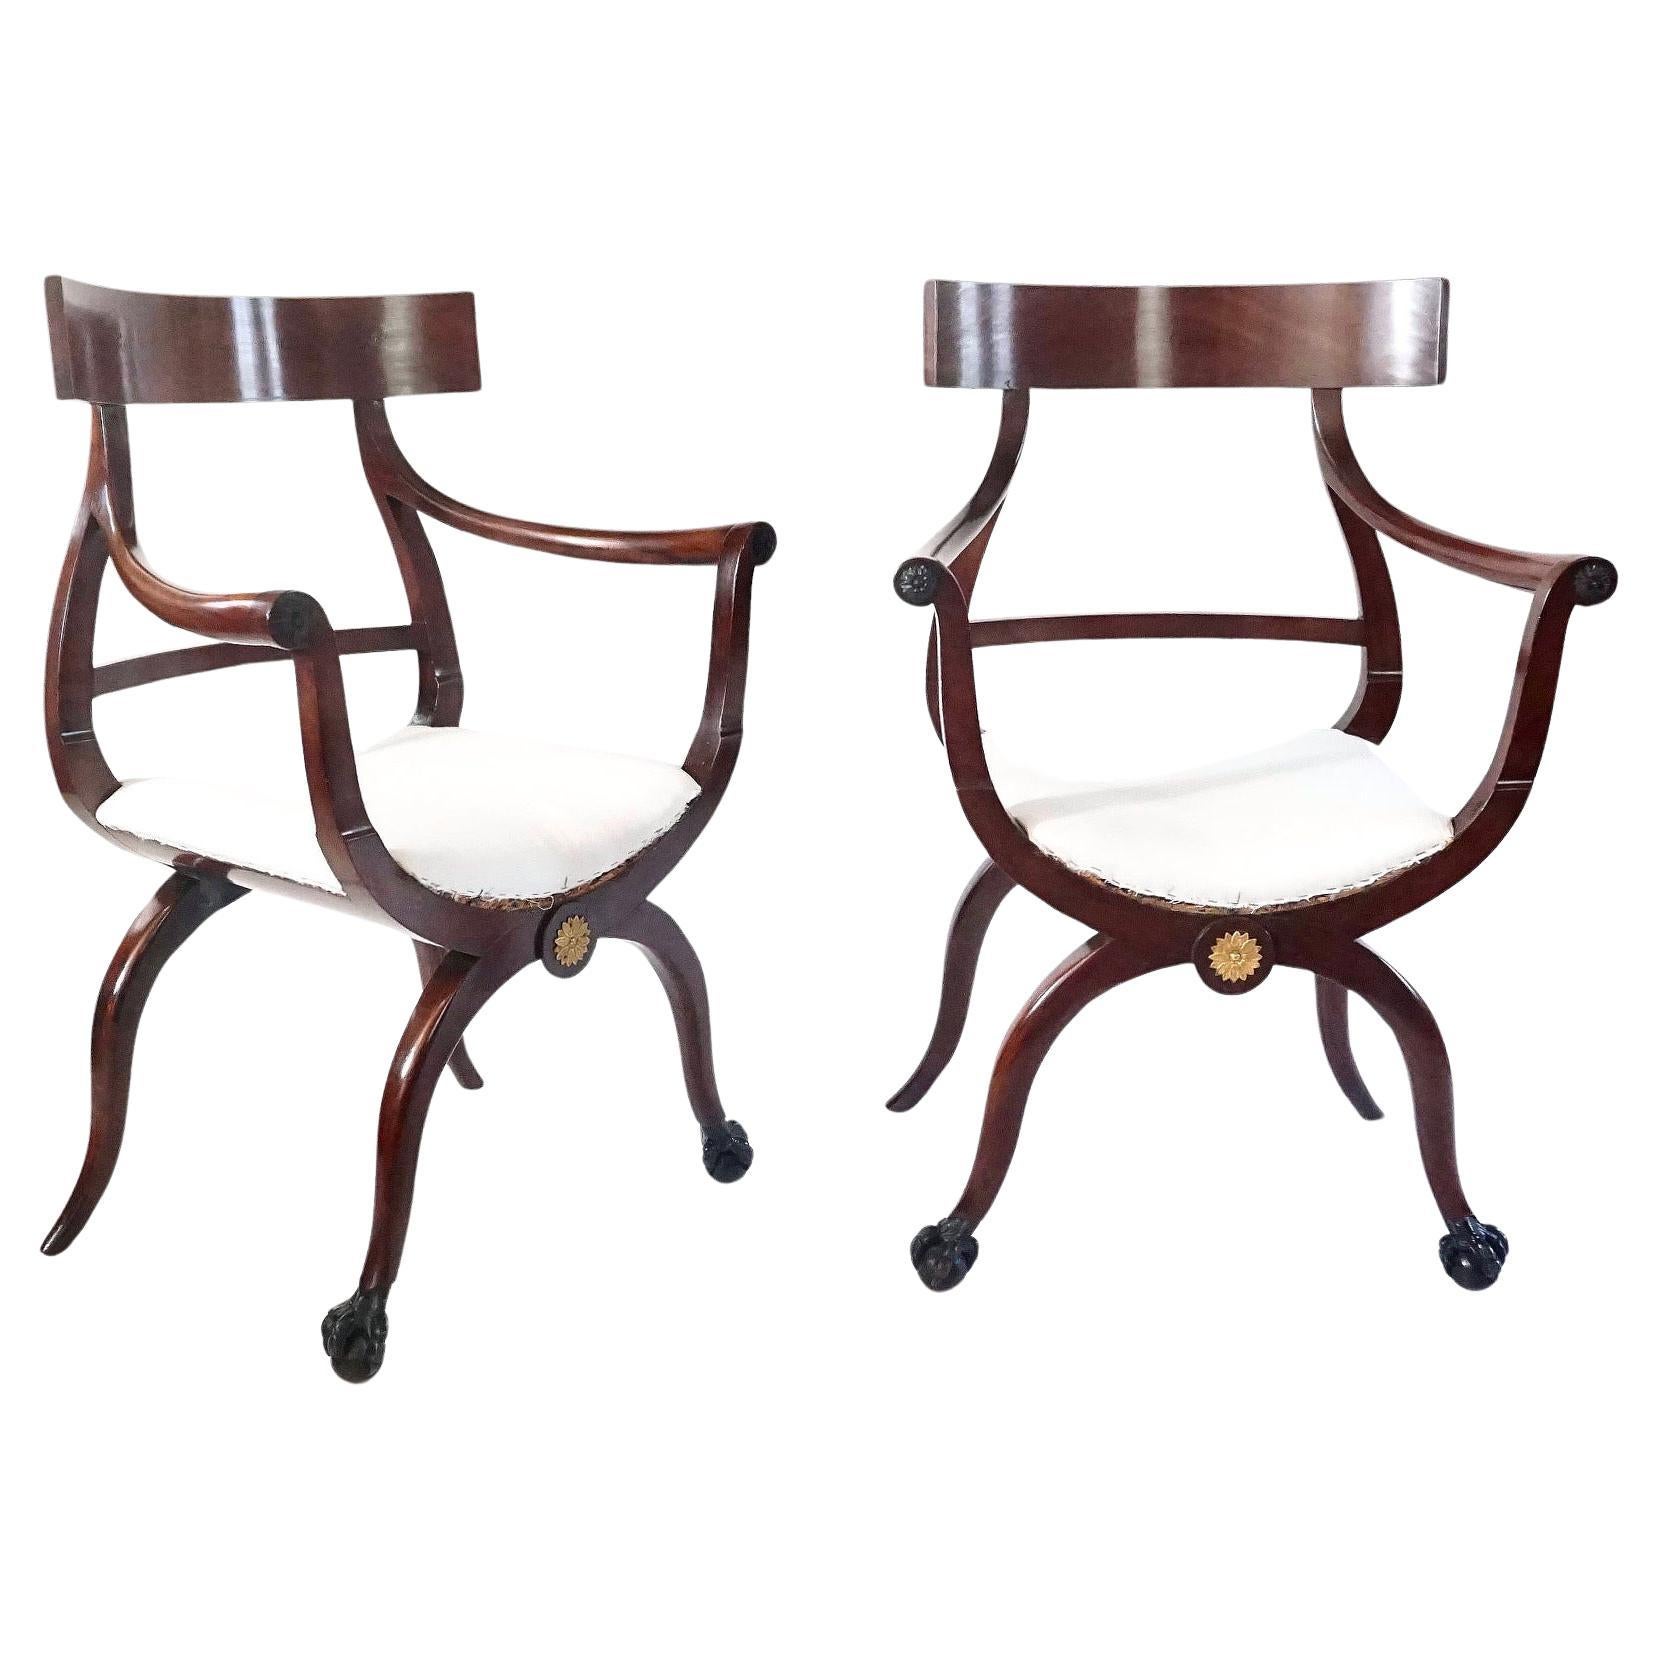 Russian Neoclassical Mahogany Armchairs, Pair, circa 1800 For Sale